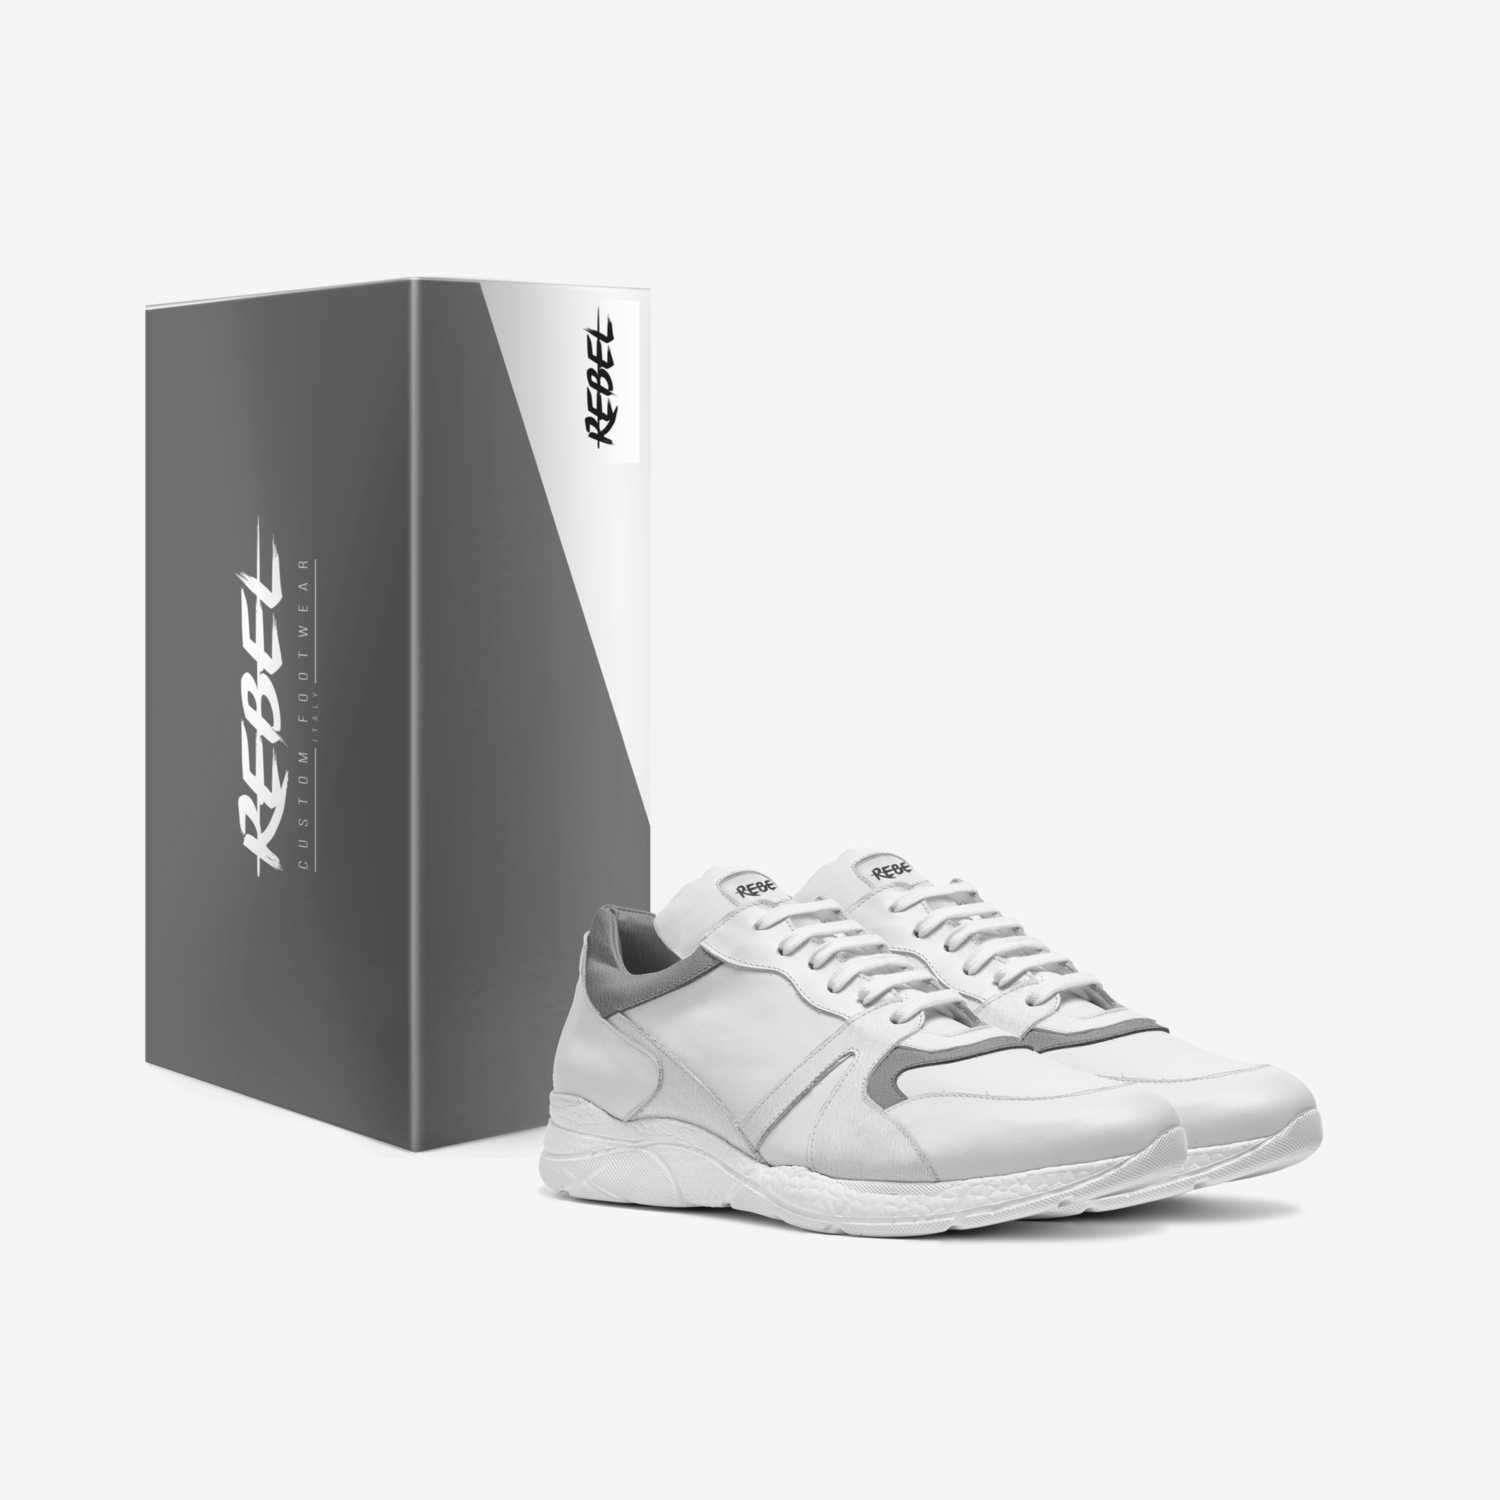 Nitro Pure White custom made in Italy shoes by Rebel Footwear | Box view